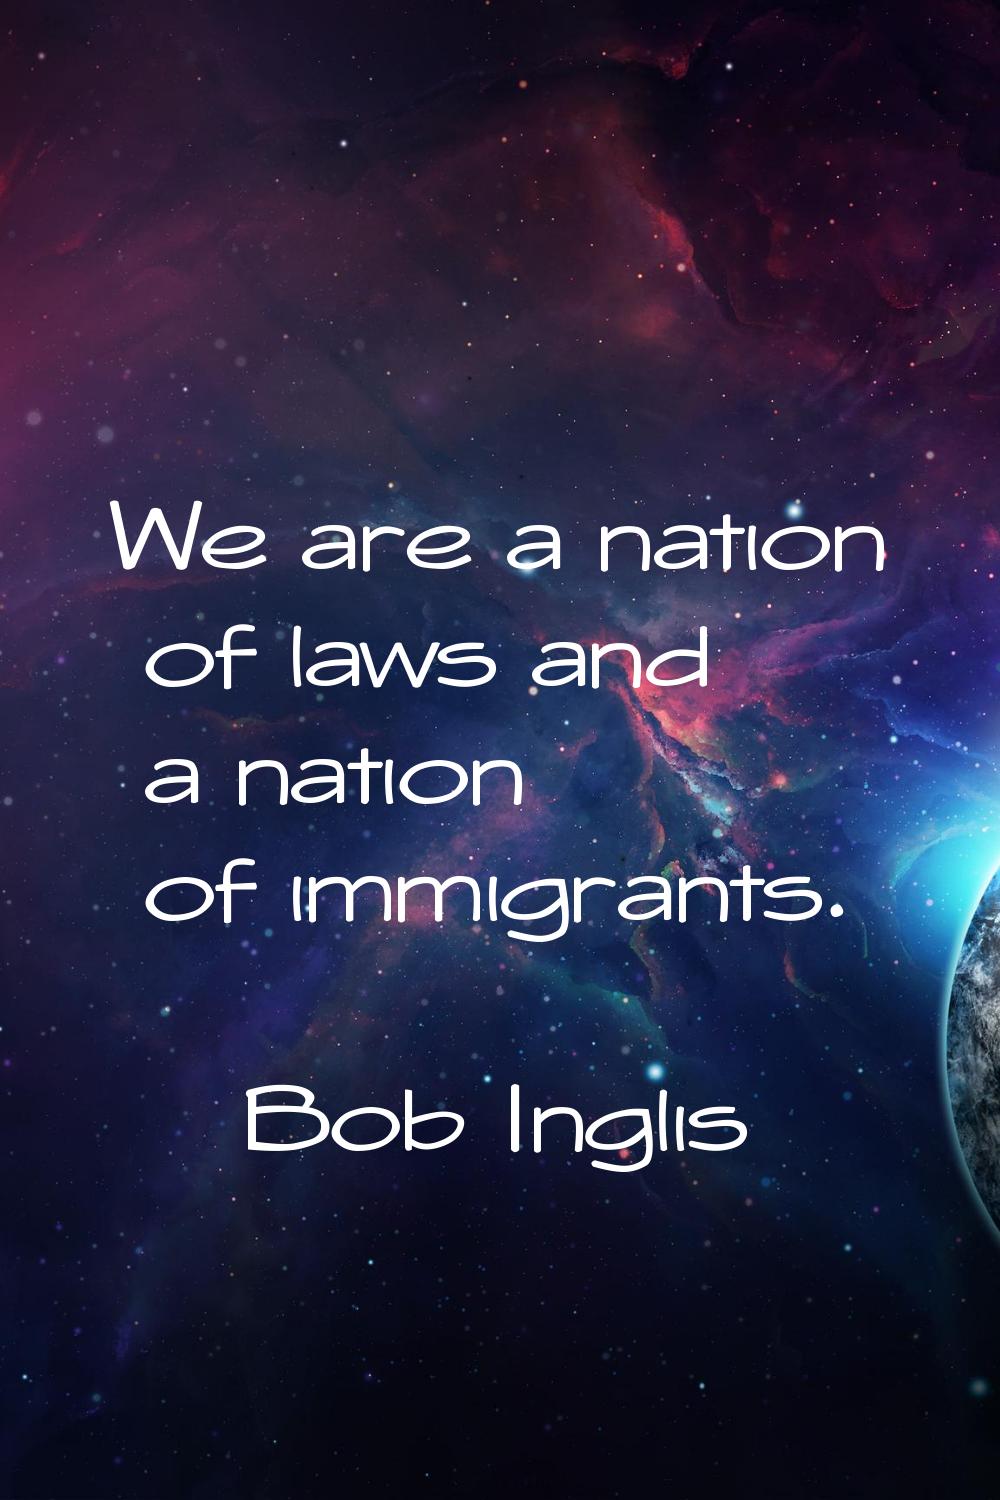 We are a nation of laws and a nation of immigrants.